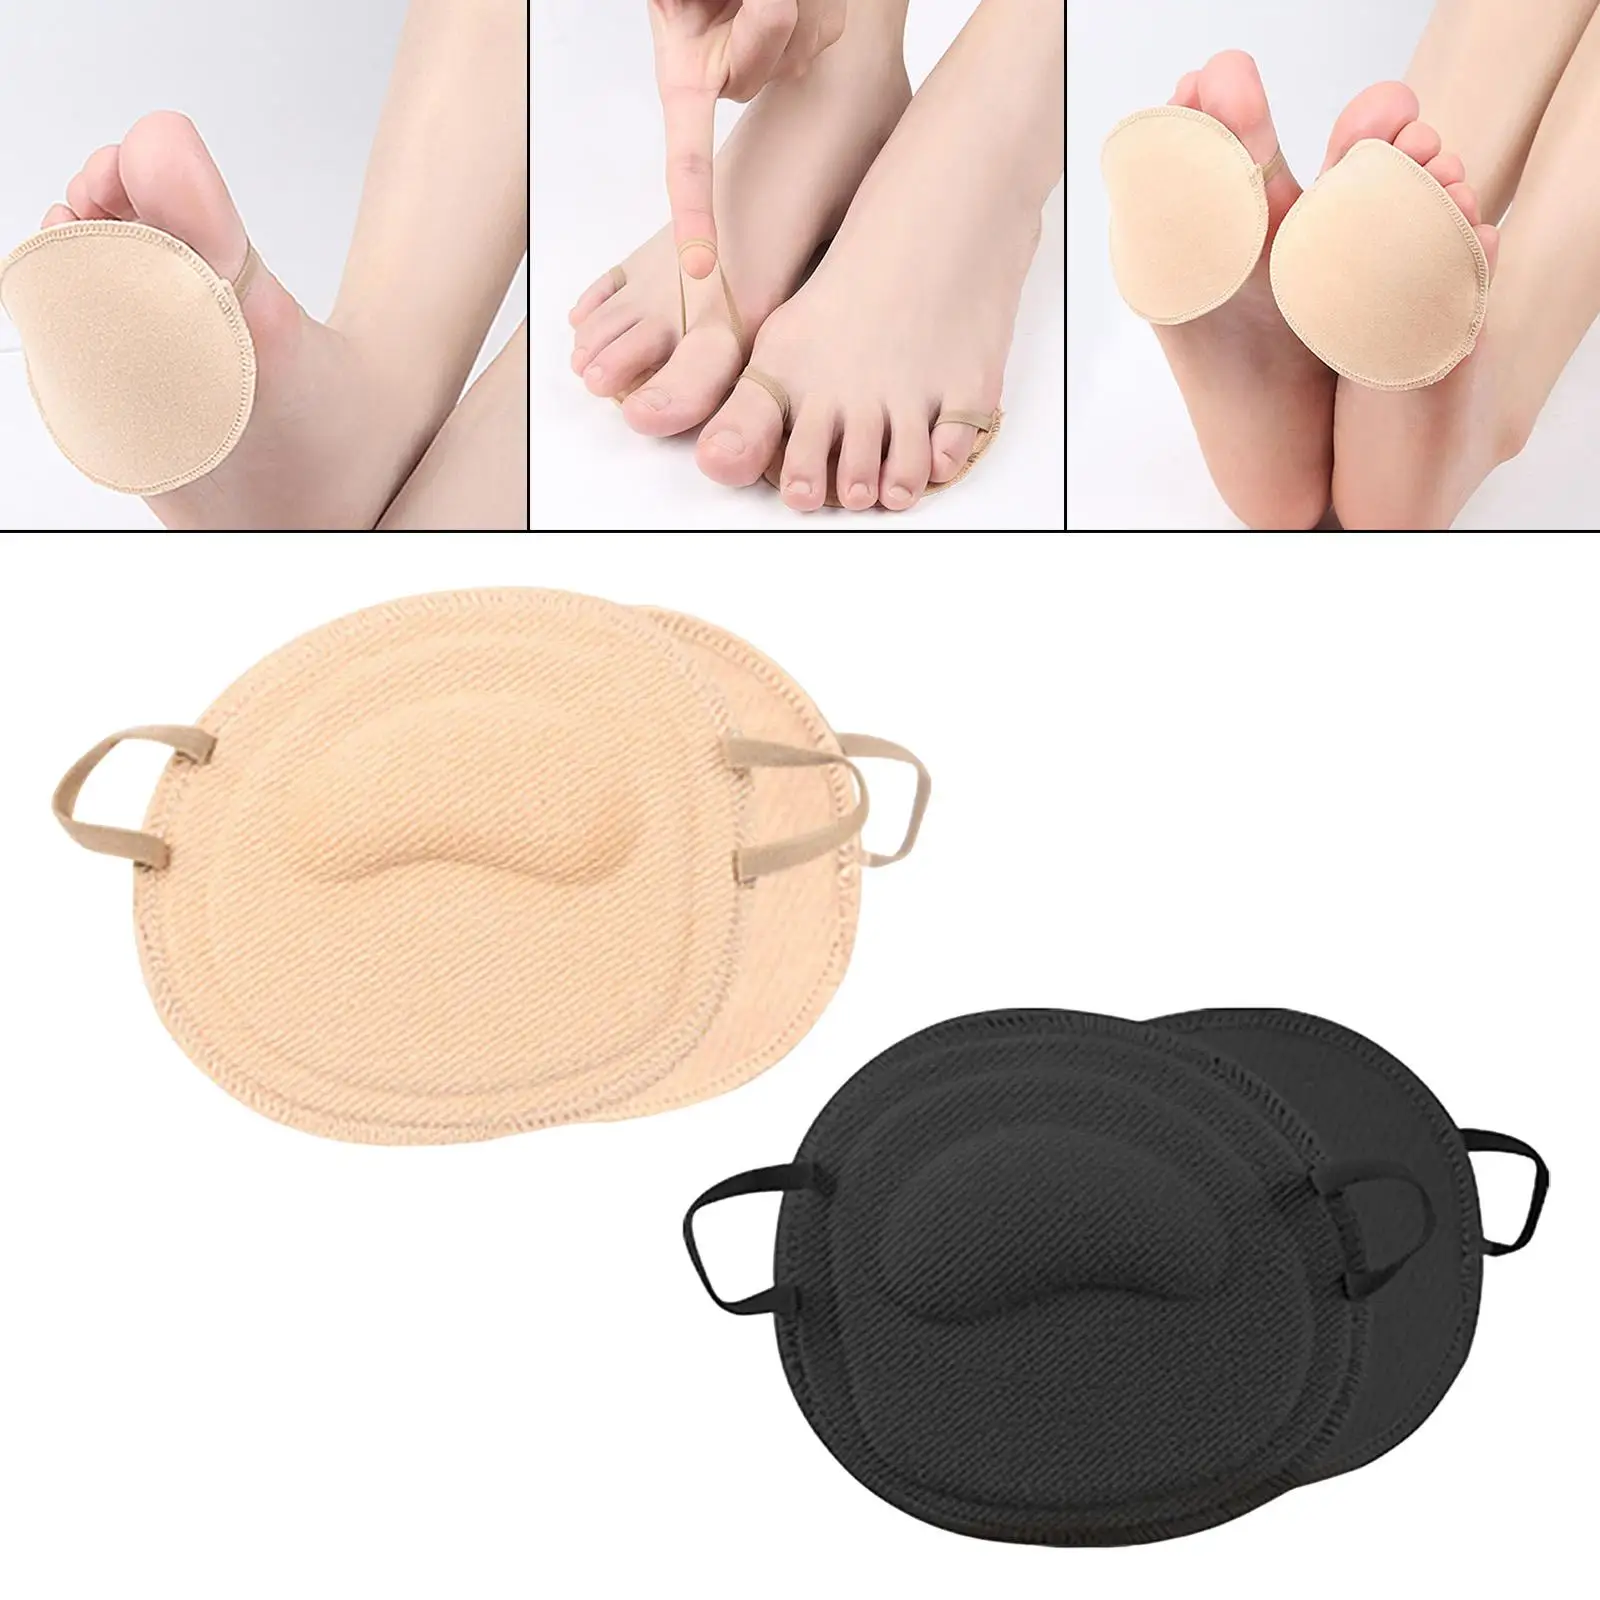 2Pcs Metatarsal Pads Foot Protection Inserts Thickened Insoles Forefoot Pads